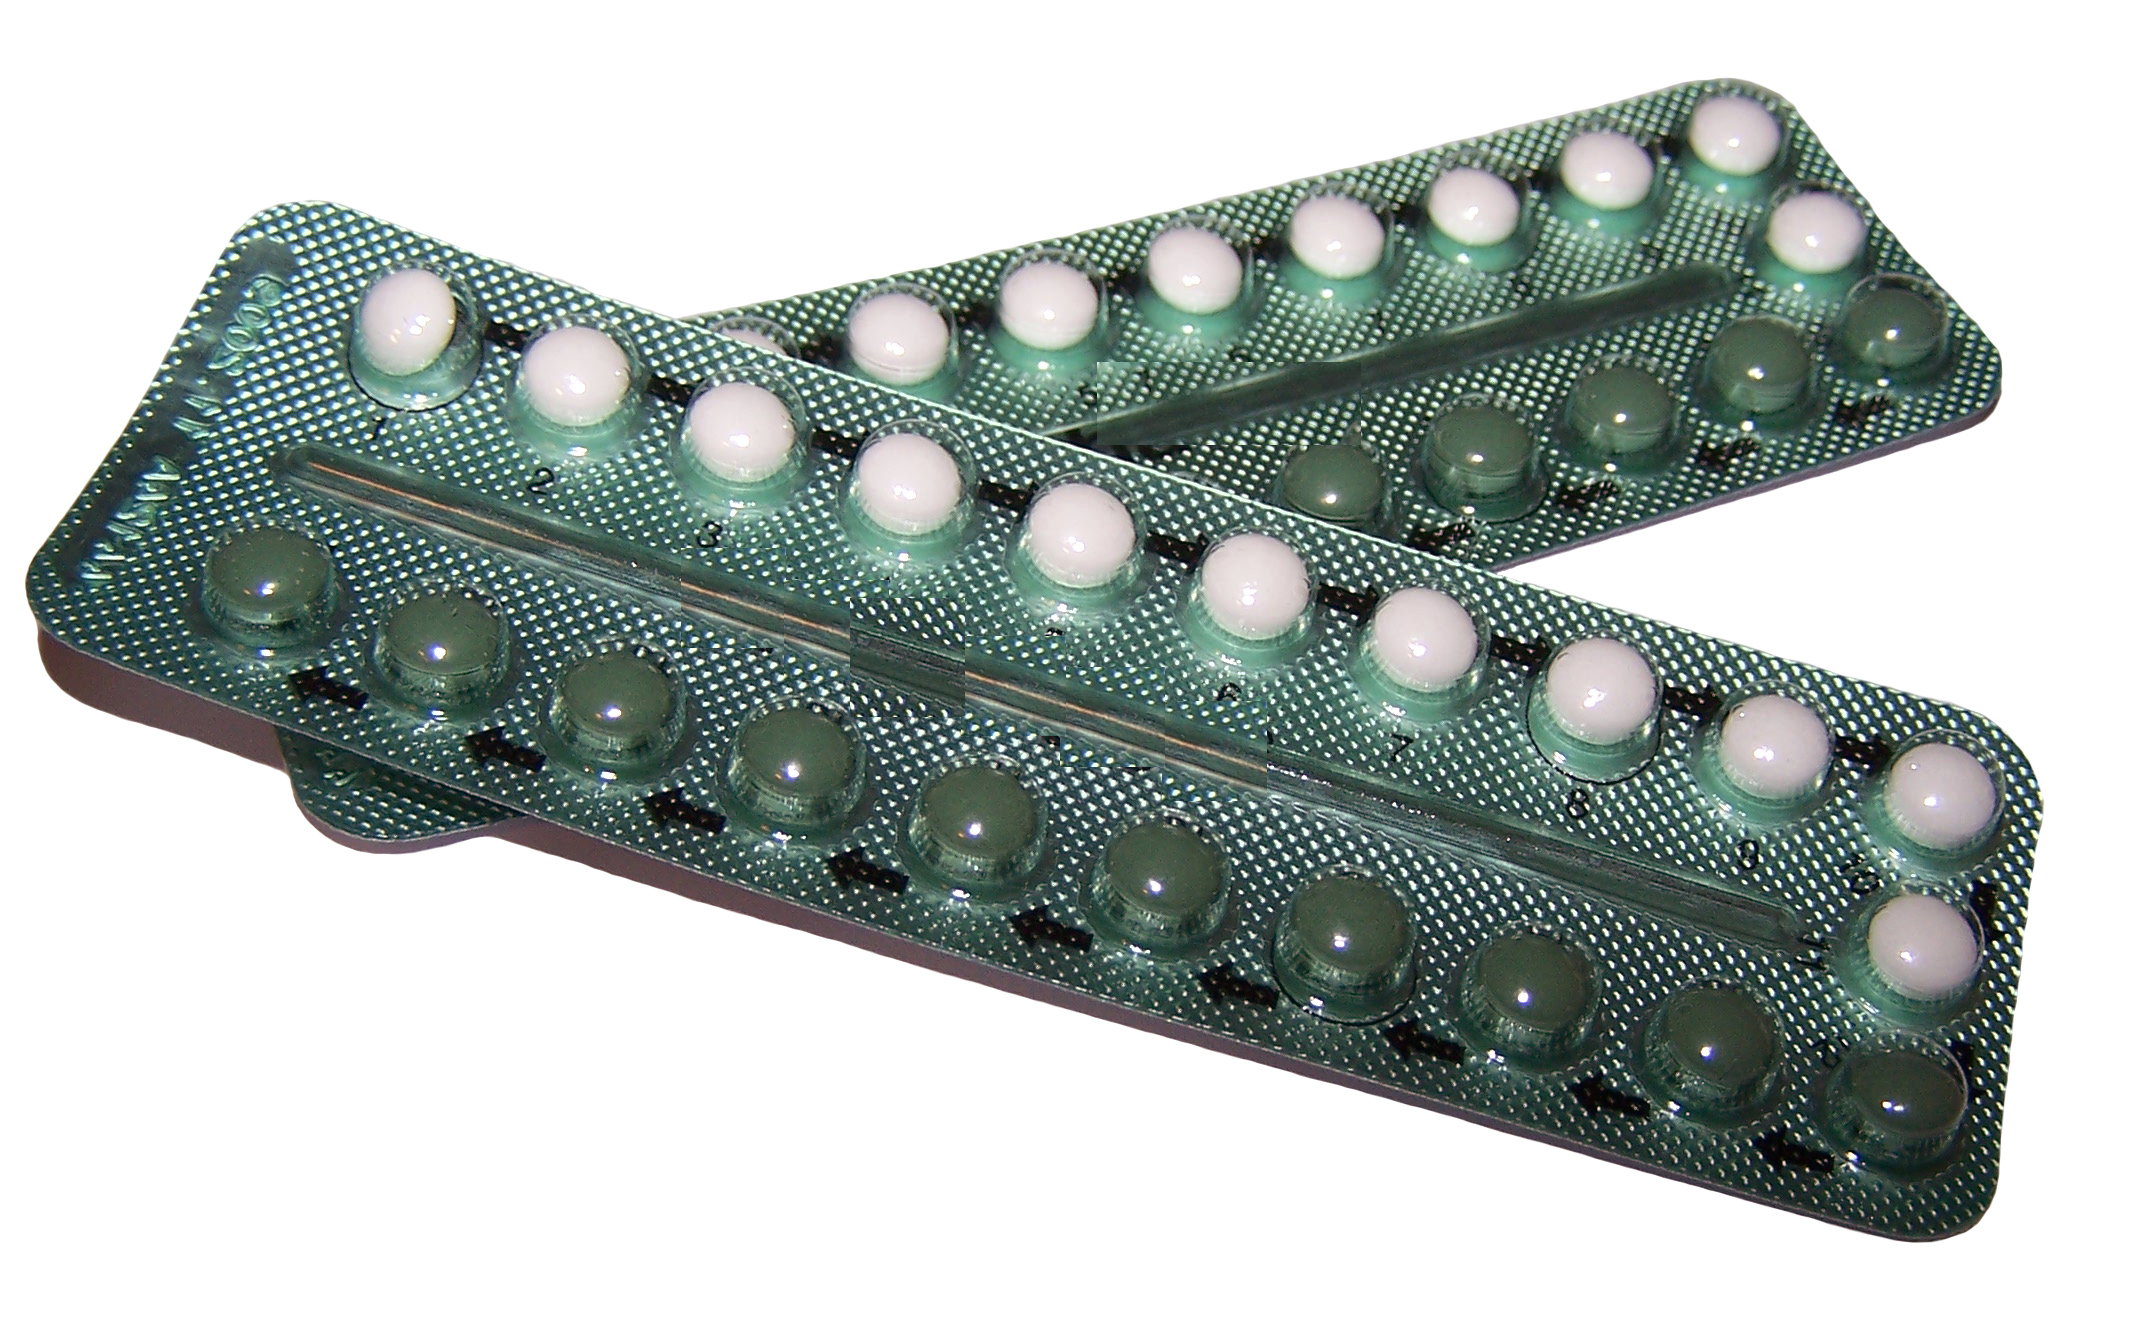 Blister pack of Combined oral contraceptive pills